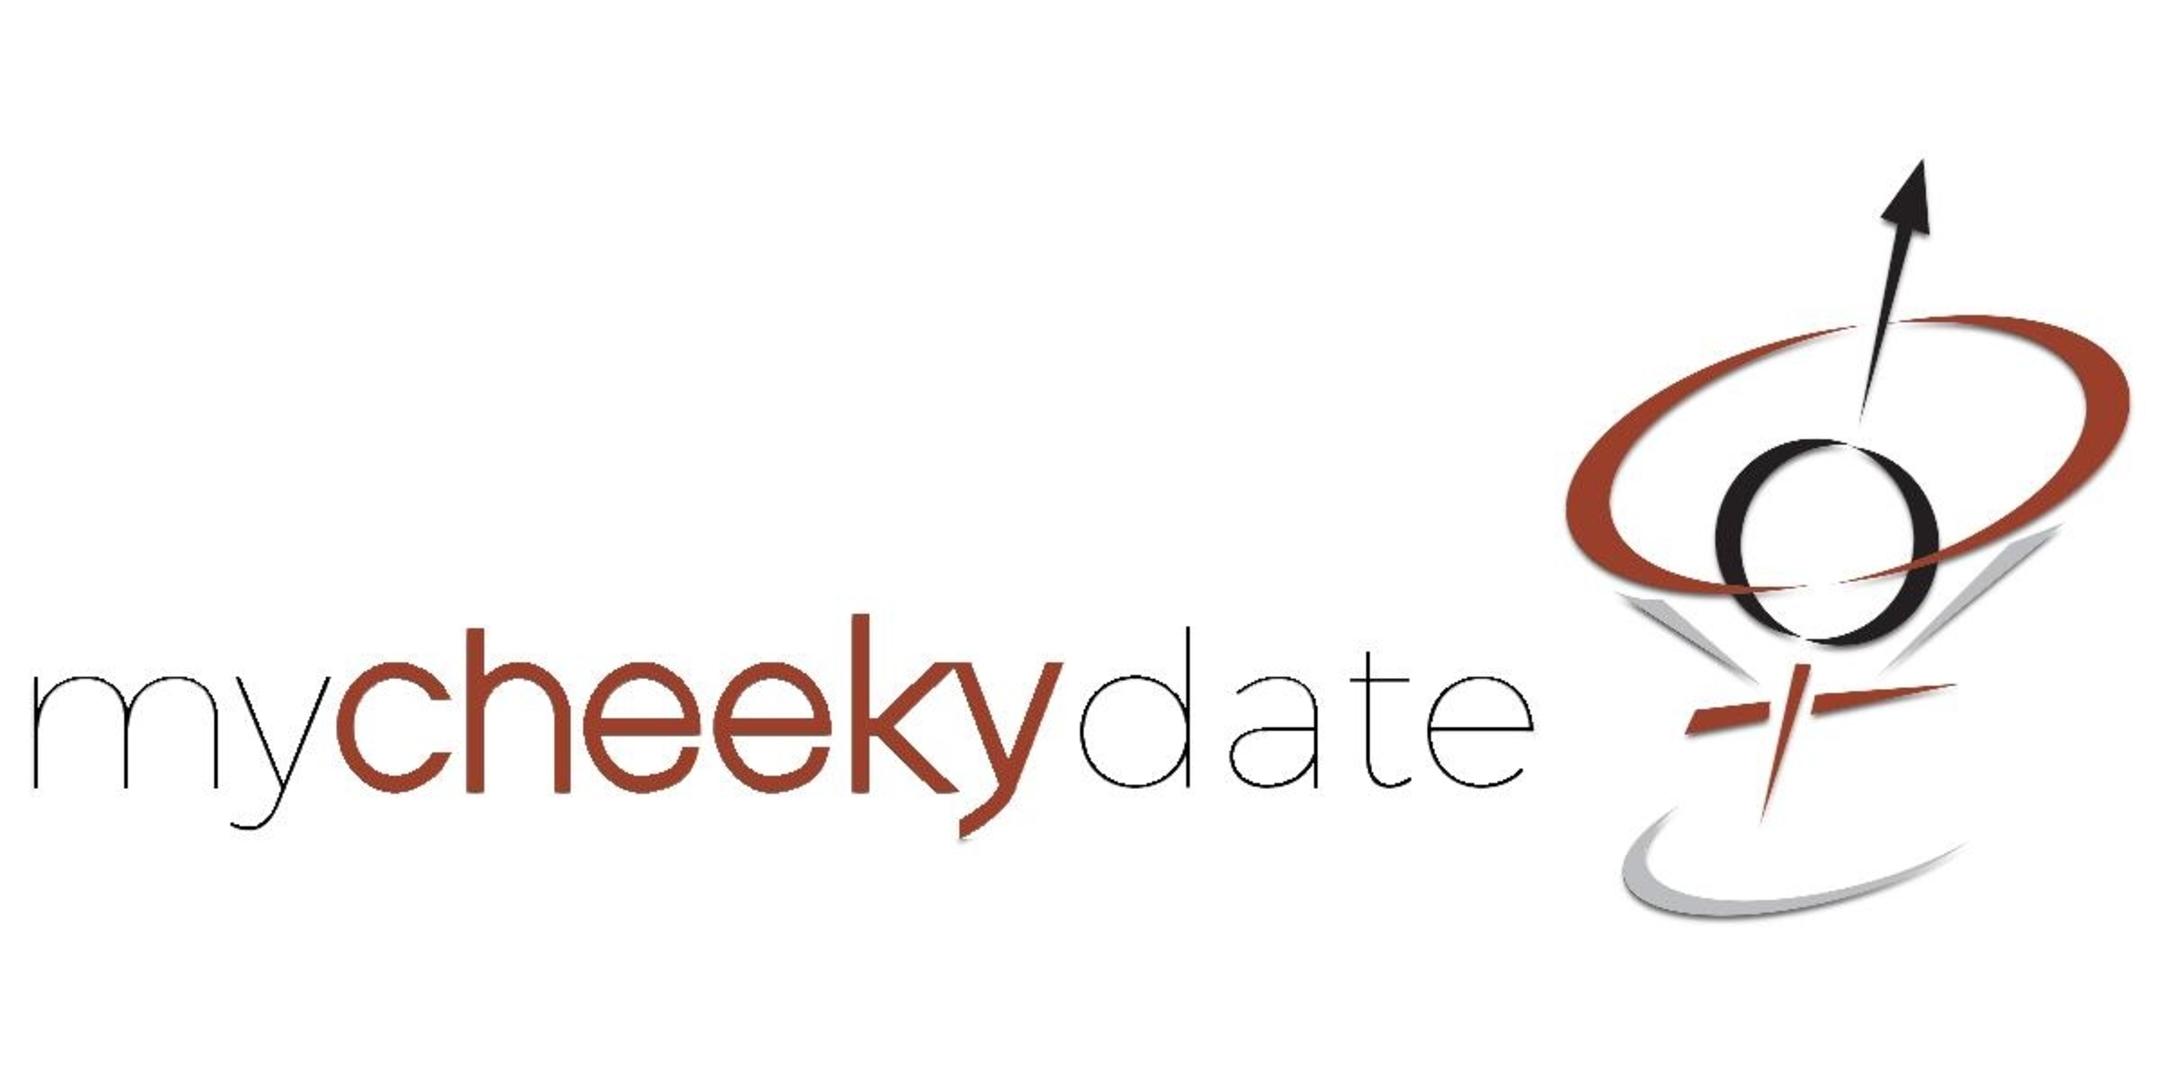 Speed Dating | Let's Get Cheeky! | Washington DC Singles Event